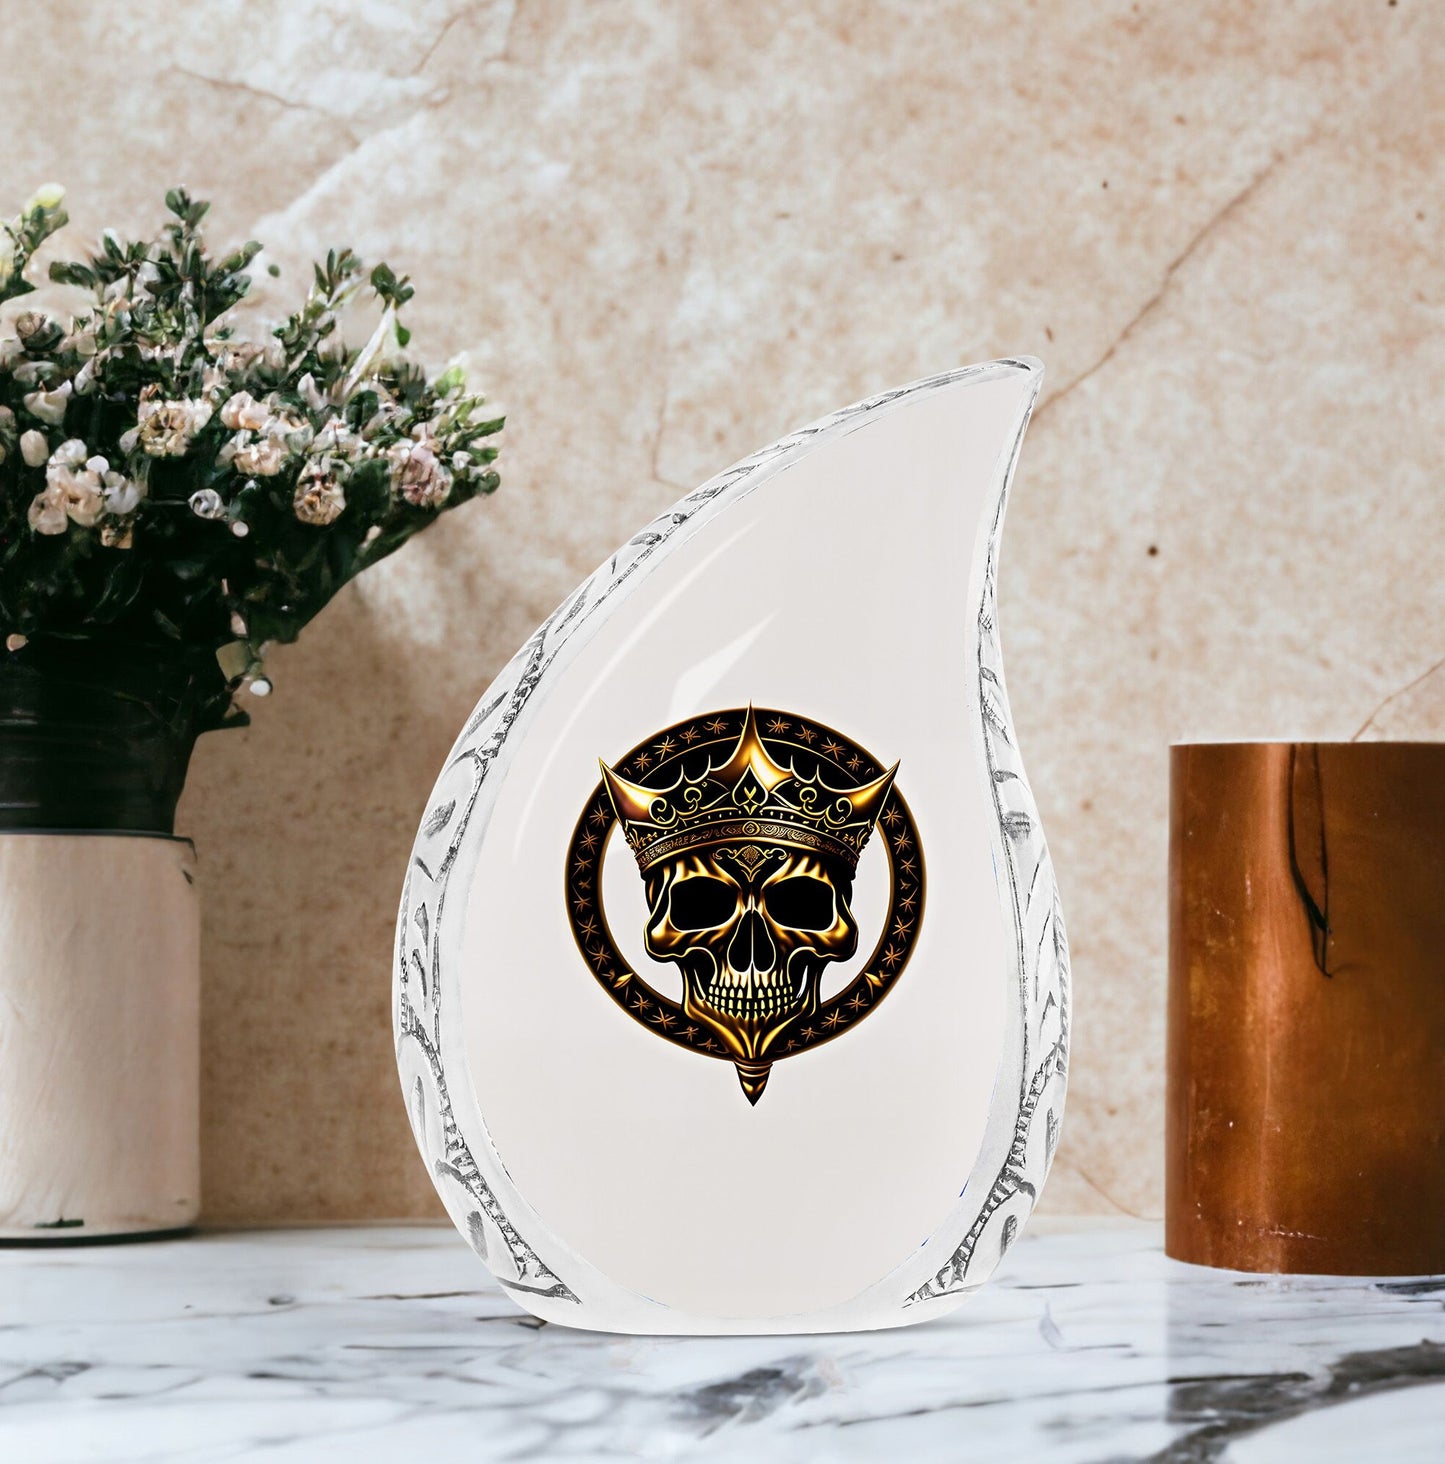 Large metal burial urn for adult ashes featuring a gold crown on a skull design, suitable for men